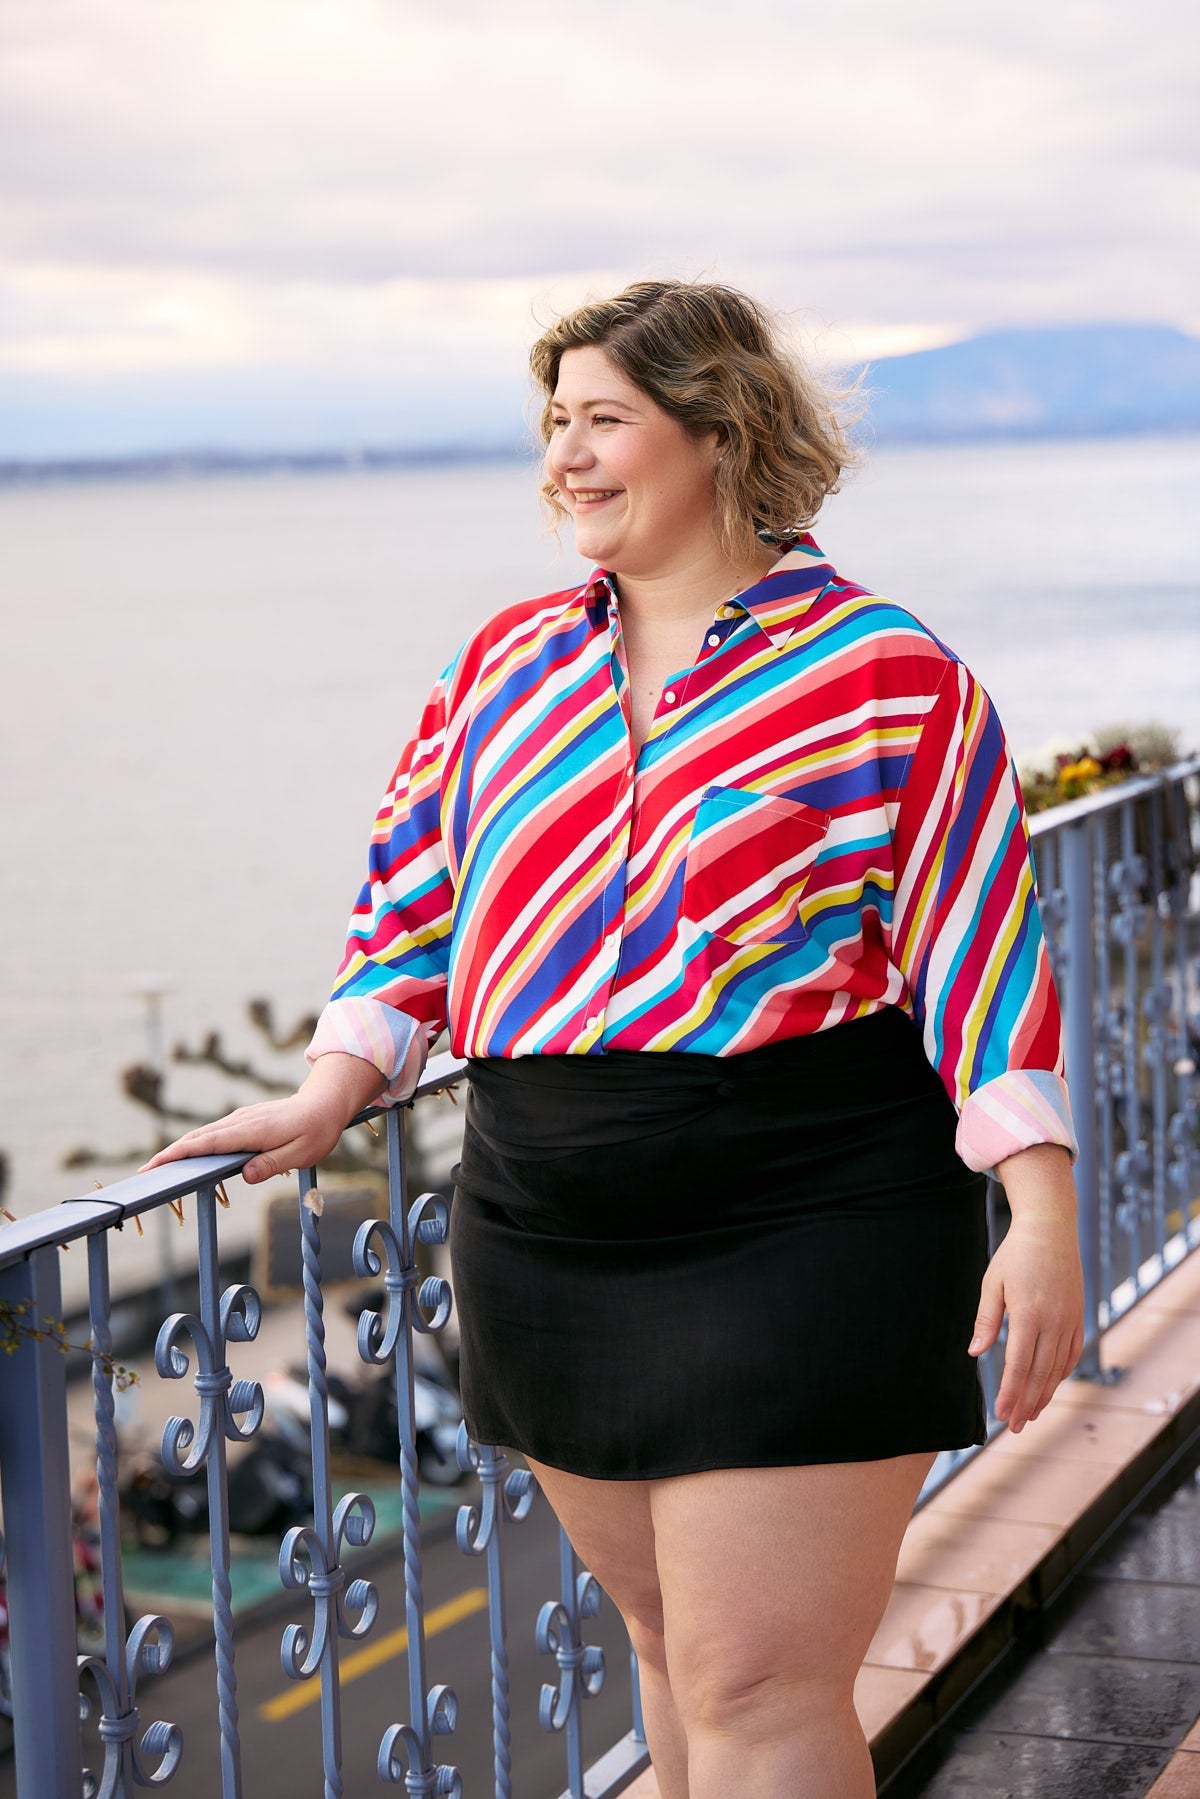 Plus Size Woman wearing Aloha shirt  with vibrant multicolor stripes